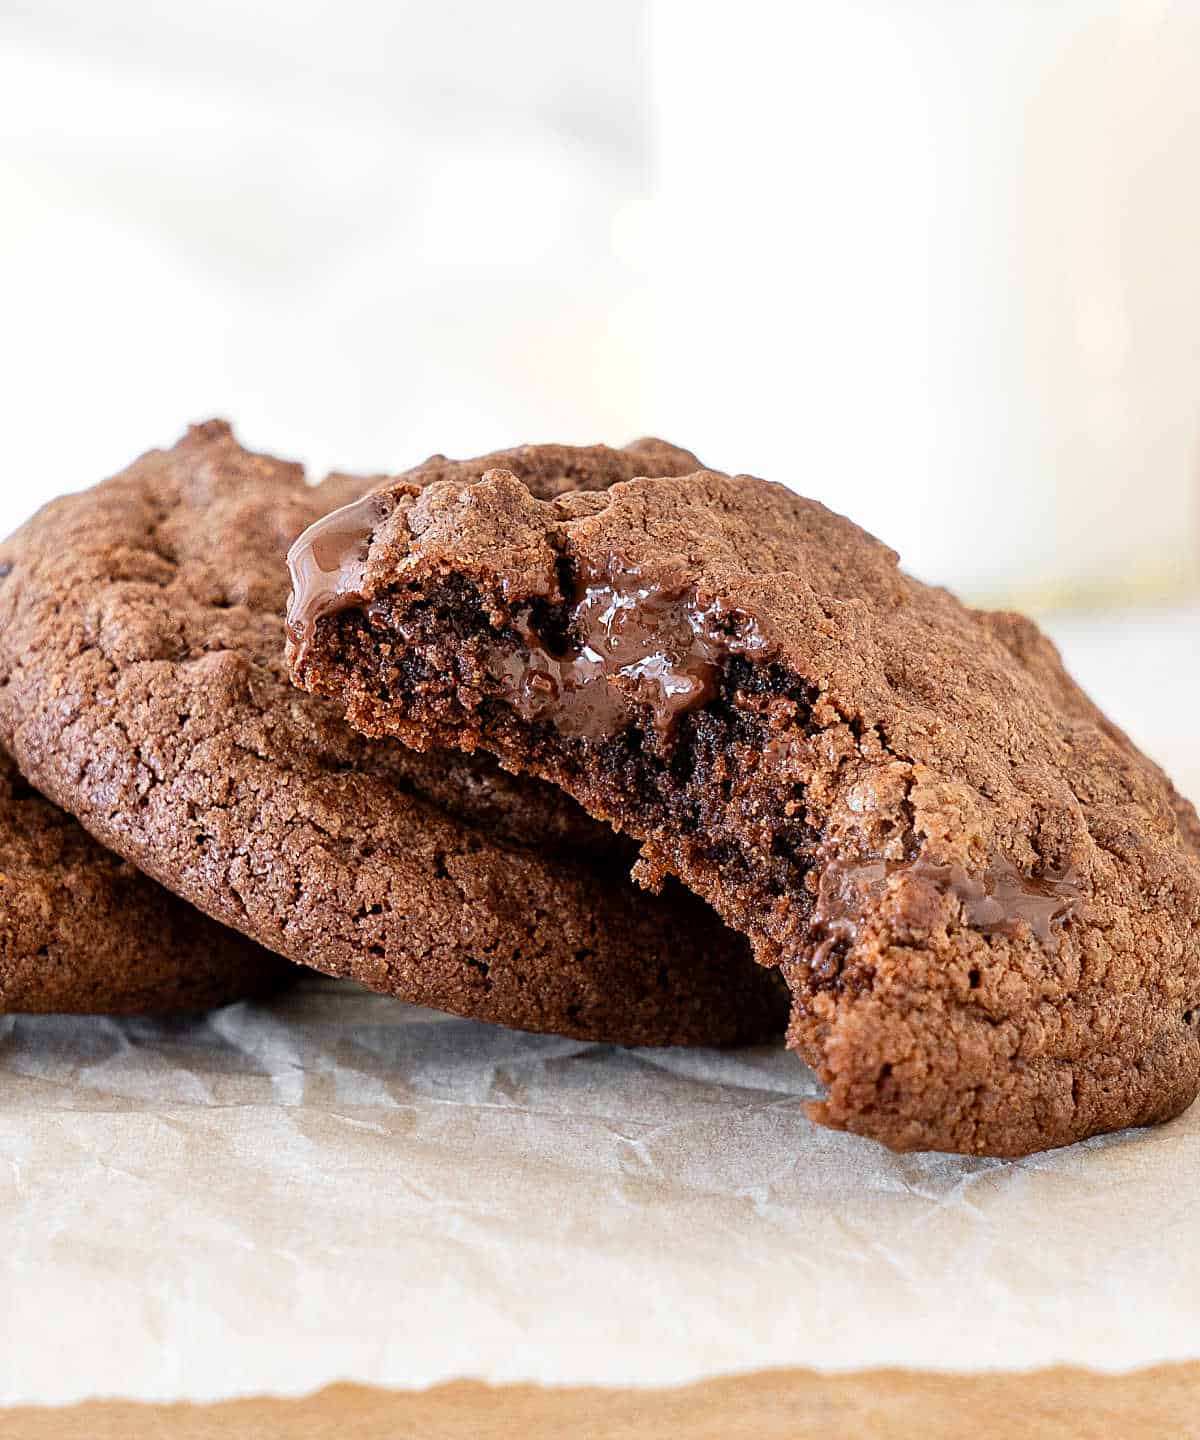 Leaning bitten chocolate cookies on a white background.